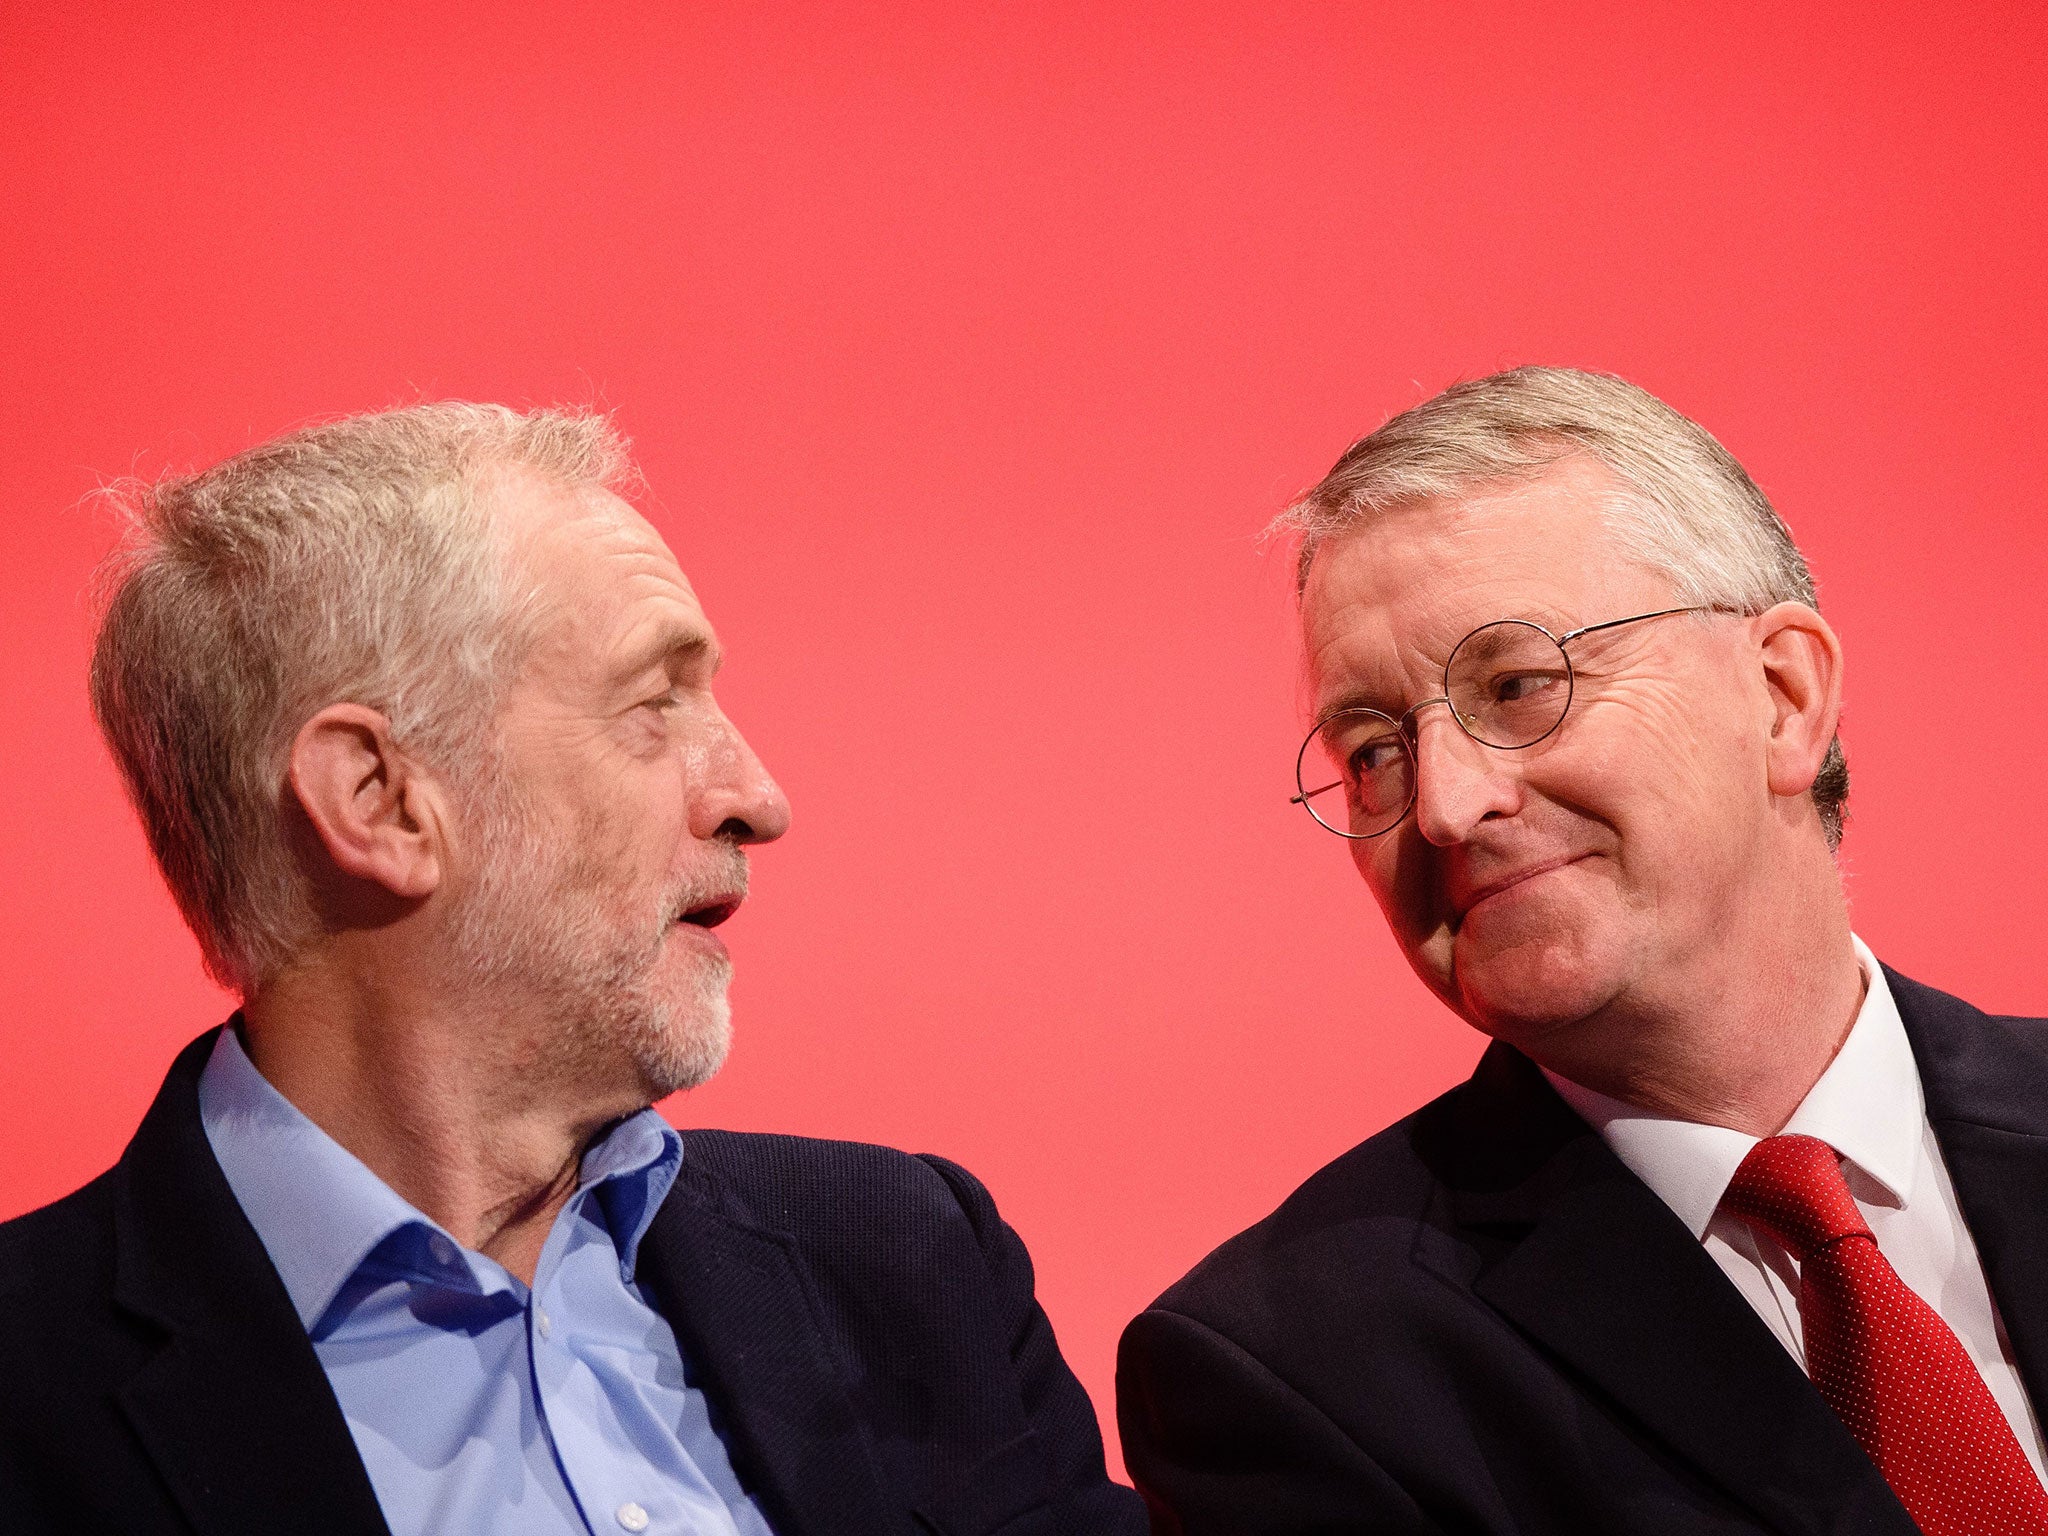 Leader of the opposition Labour Party Jeremy Corbyn speaks with with Shadow Foreign Secretary Hilary Benn on day two of the annual Labour party conference in Brighton on 28 September, 2015